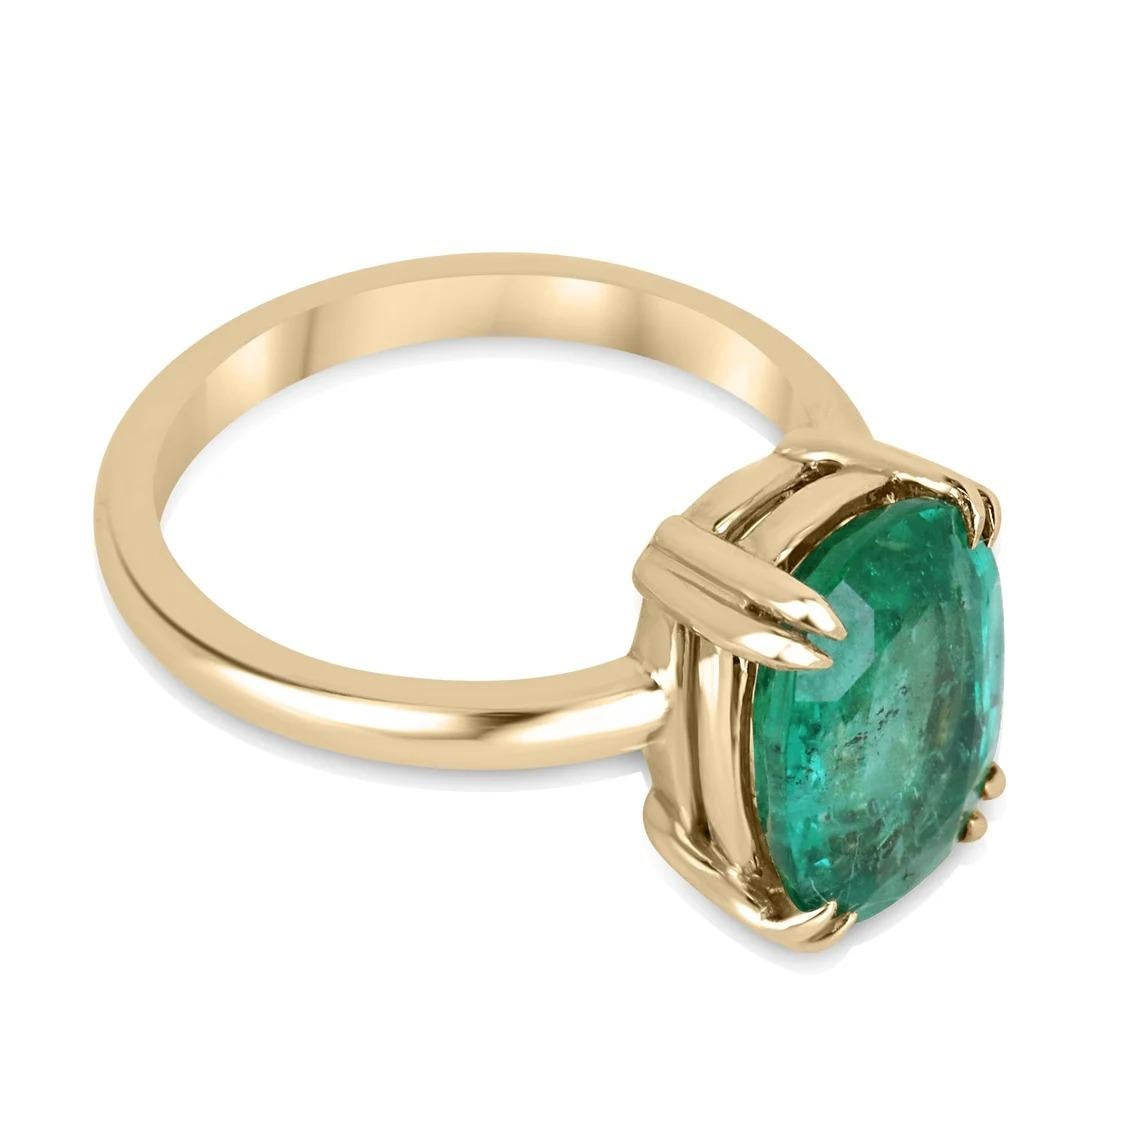 This stunning solitaire ring features a natural 3.89-carat elongated cushion cut emerald that displays a vibrant, medium-green color and very good clarity, adding to its allure. The emerald is set in an elegant double-prong setting crafted from 14k